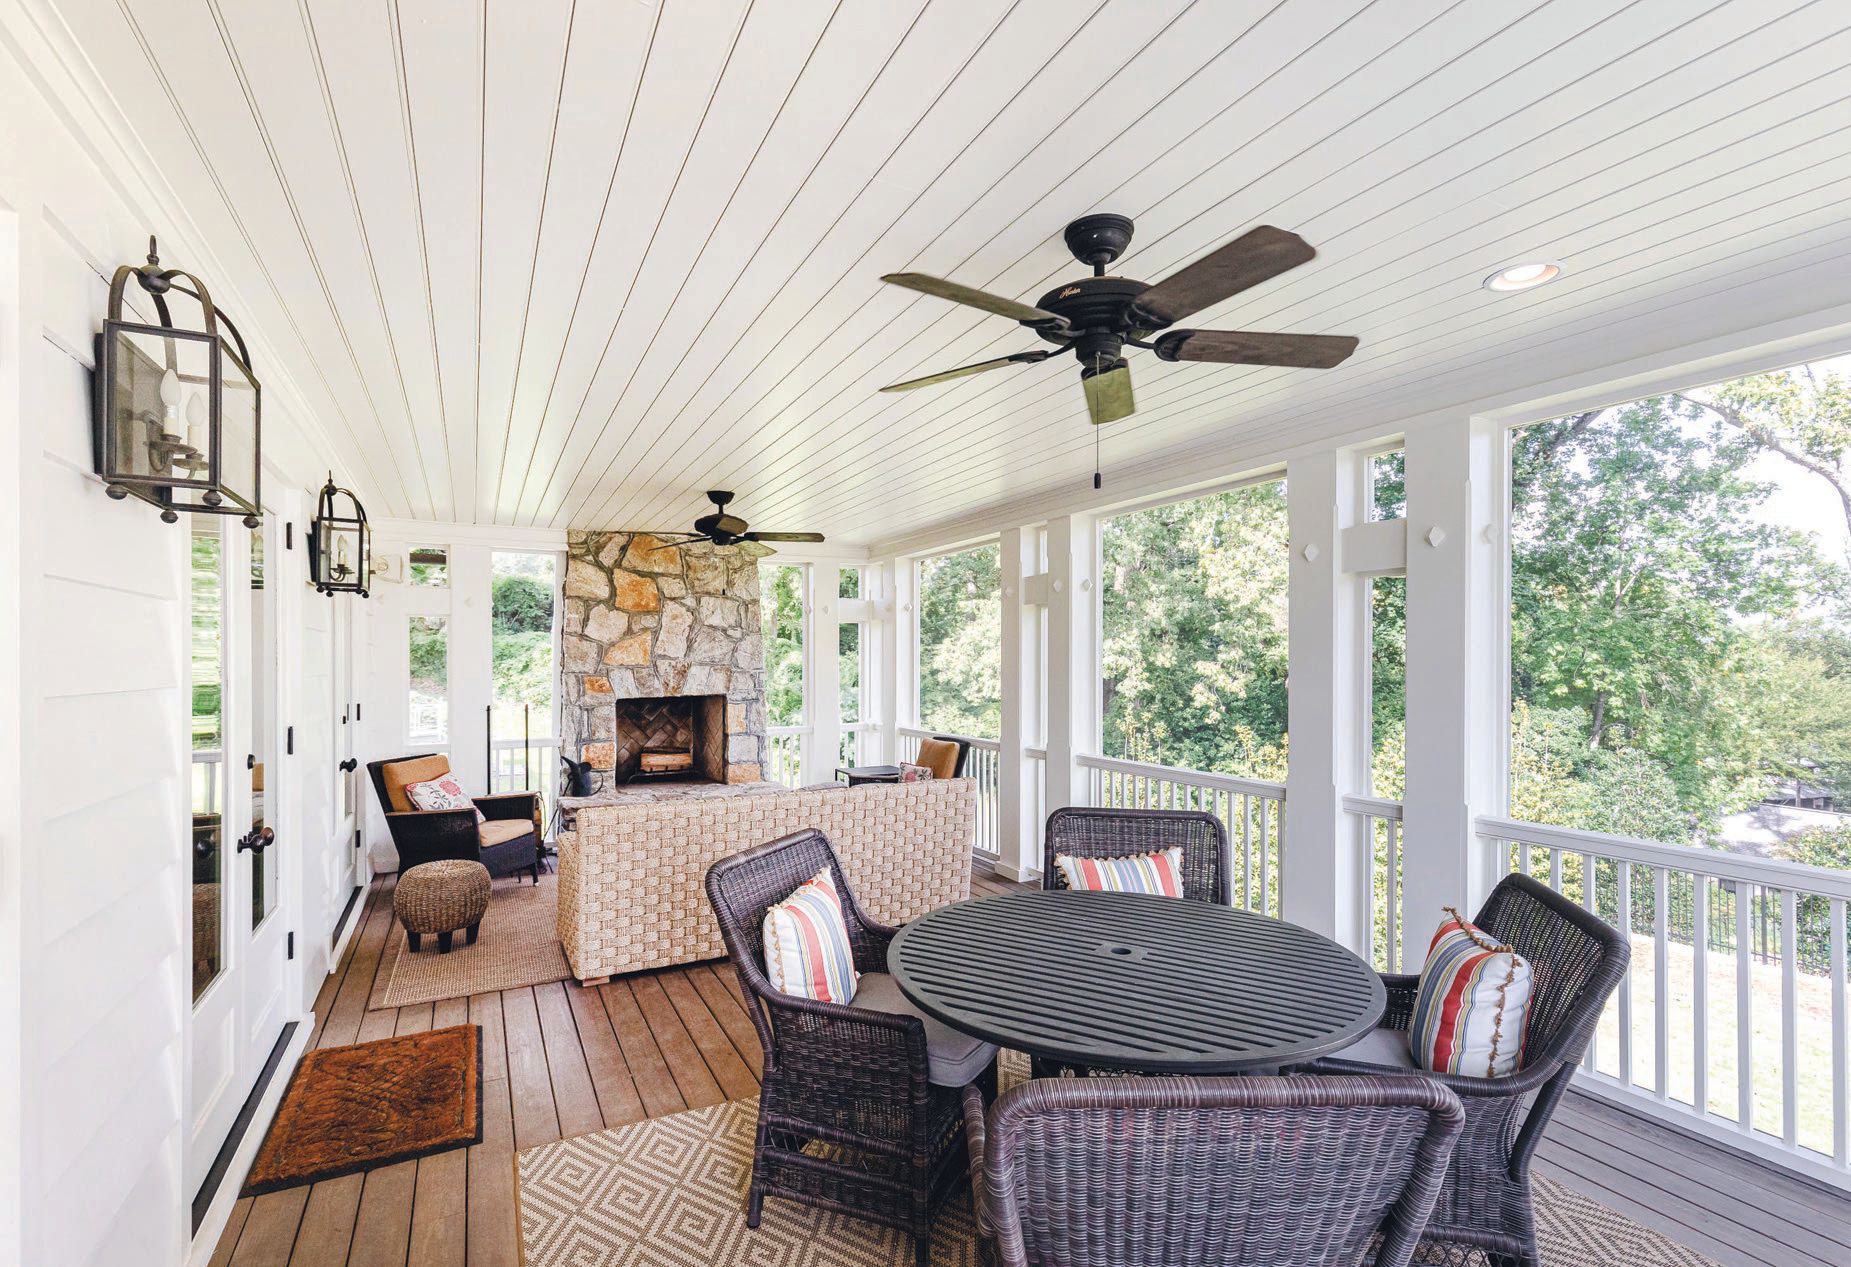 The home is located atop one of Ansley Park’s highest vistas, and the screened-in porch is the perfect place to experience views of nature